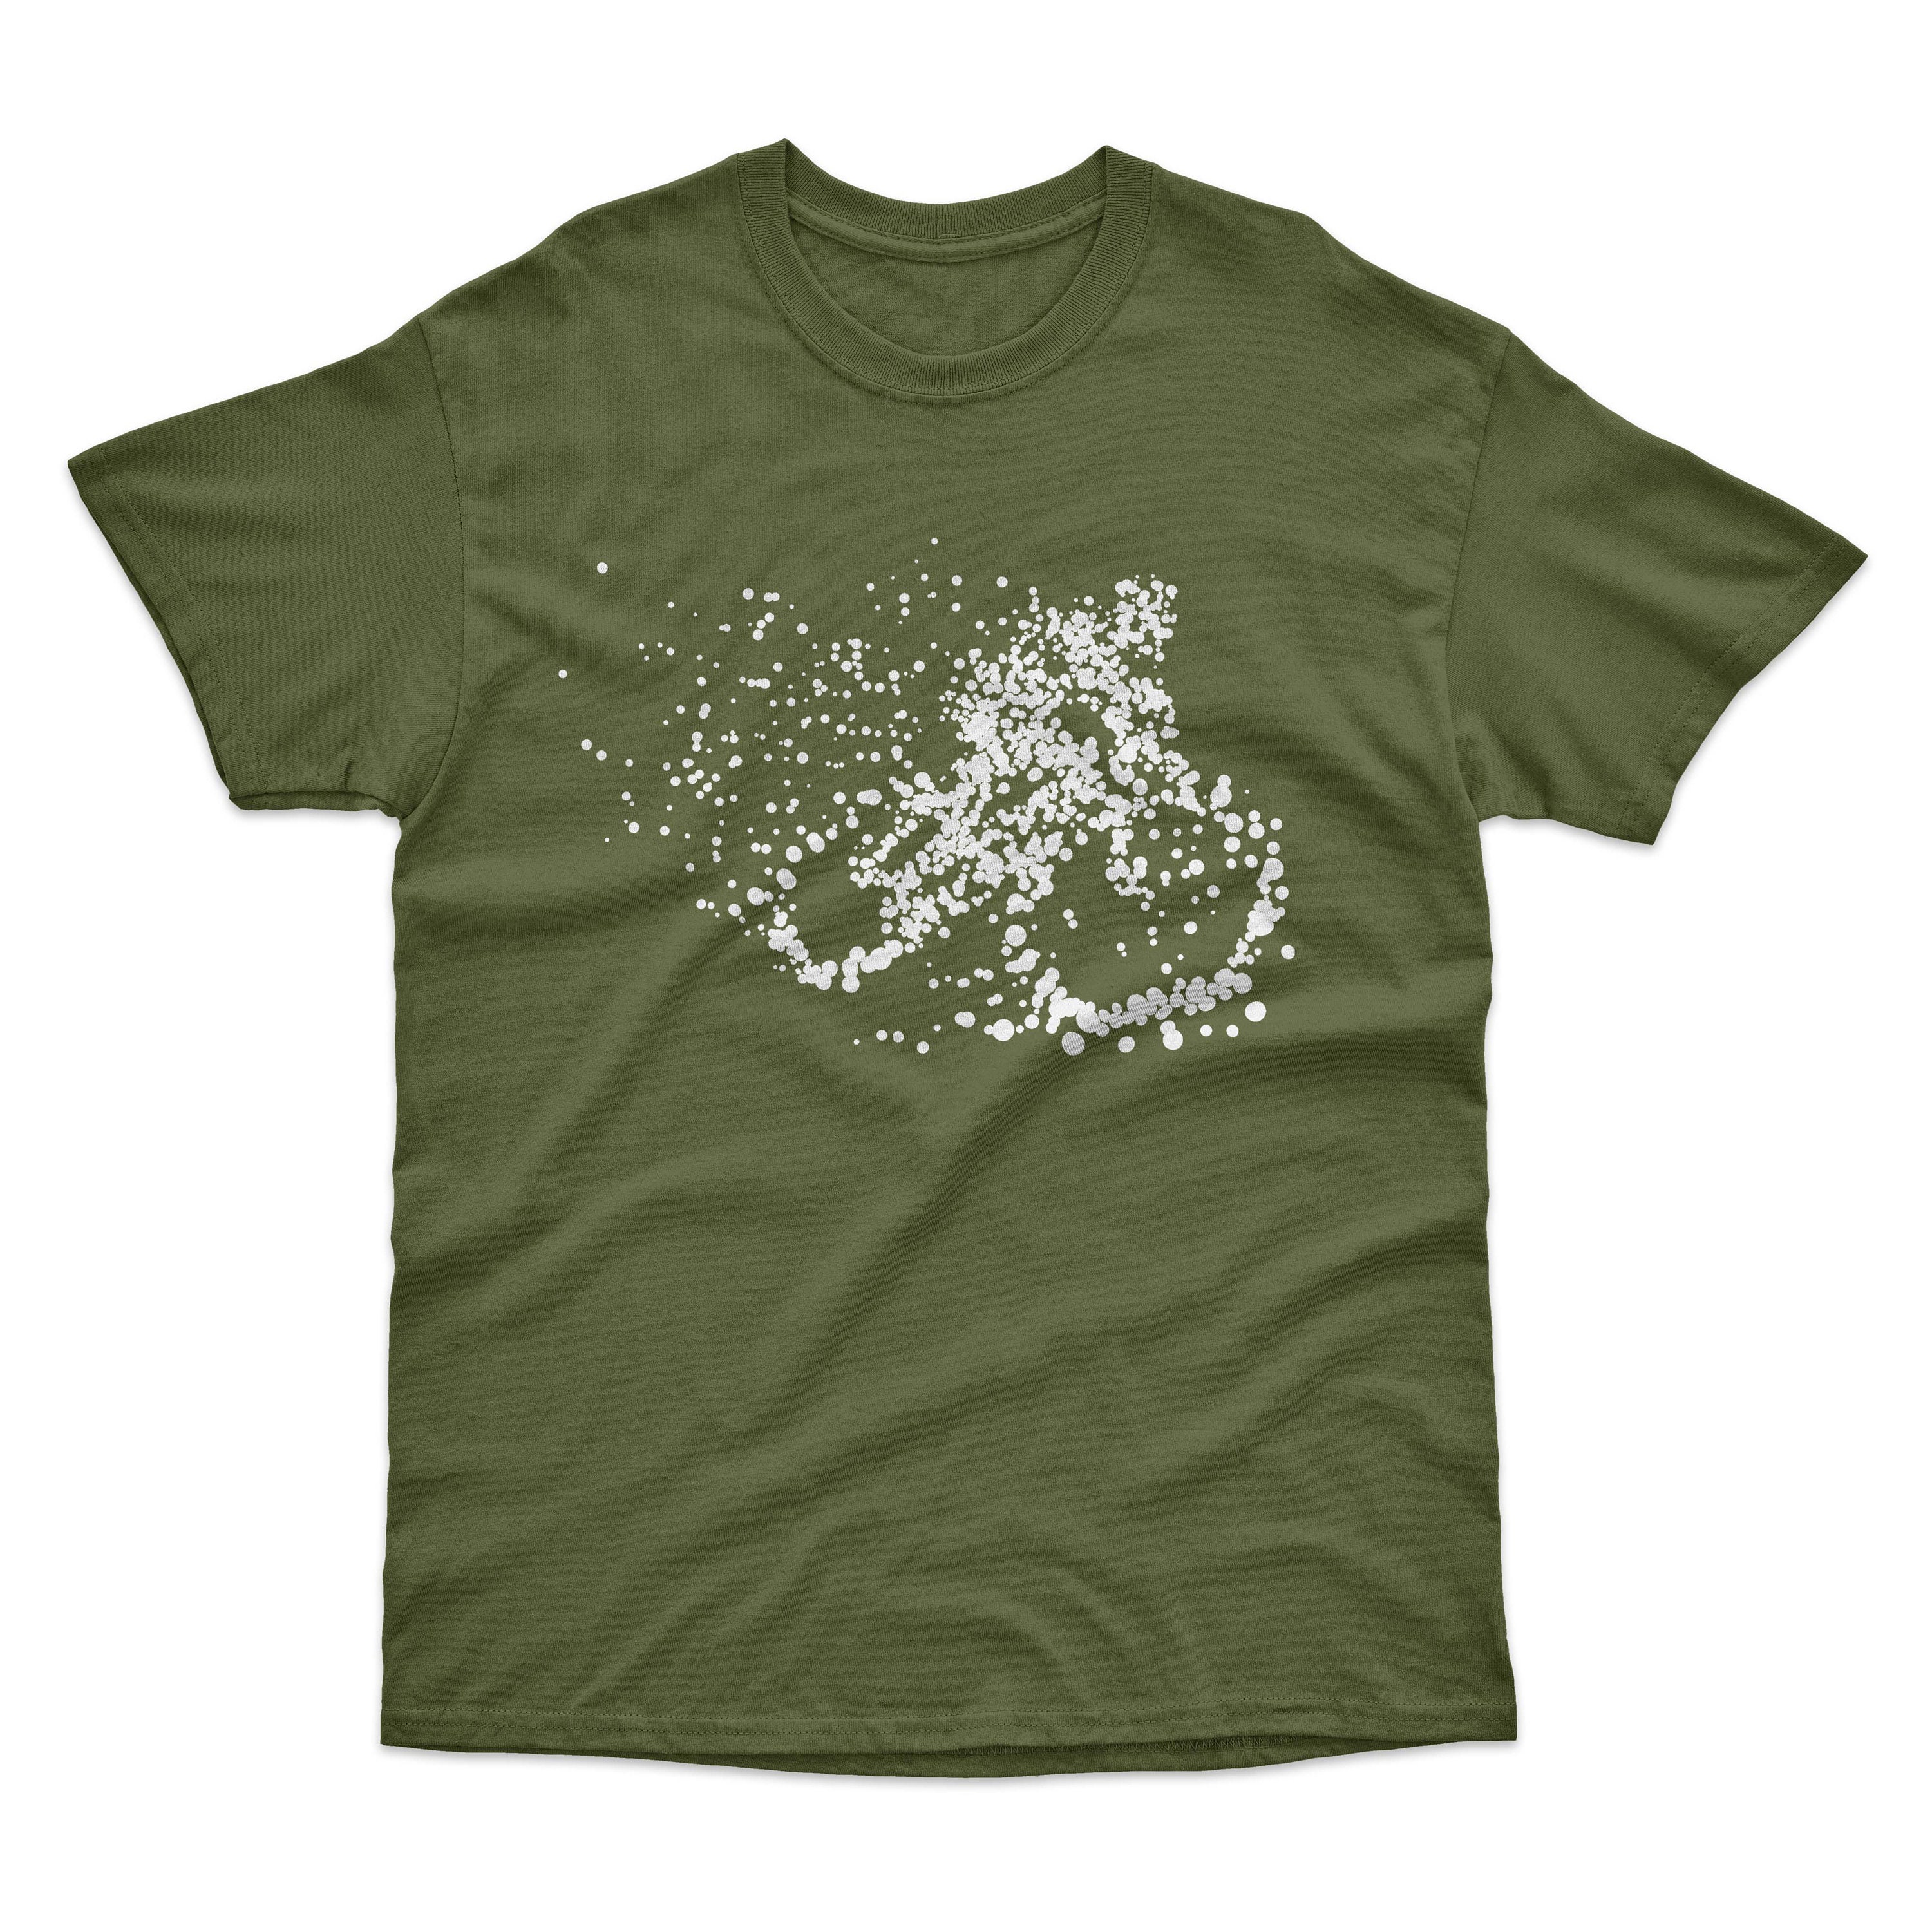 Particle Dot Cyclist T-Shirt | Mountain Biking Biker Mtb Road Bicycle Heavyweight Quality Gift Printed In-House